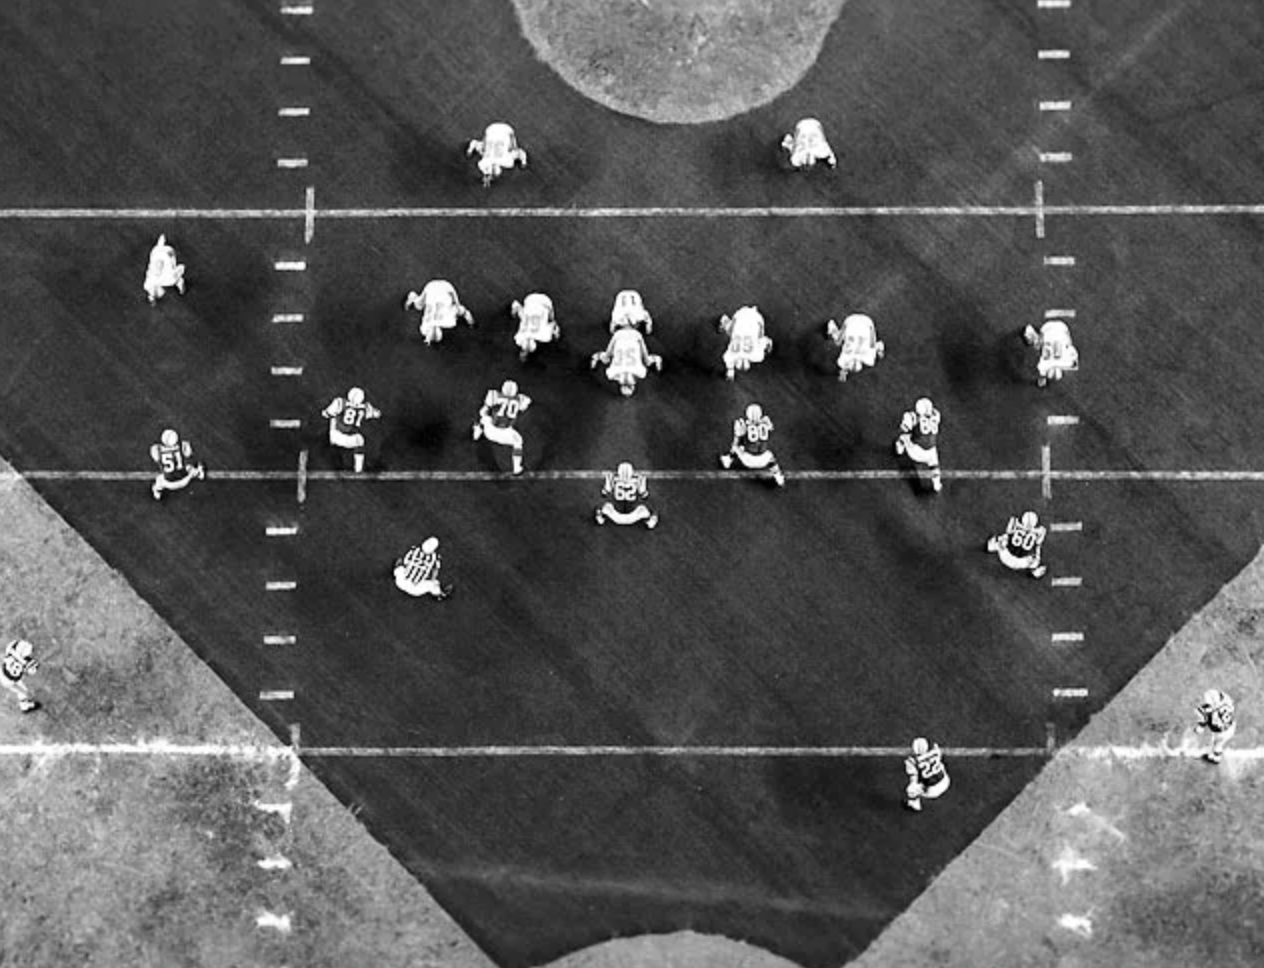 26 Old Time Football Pics That Show How Far the NFL Has Come